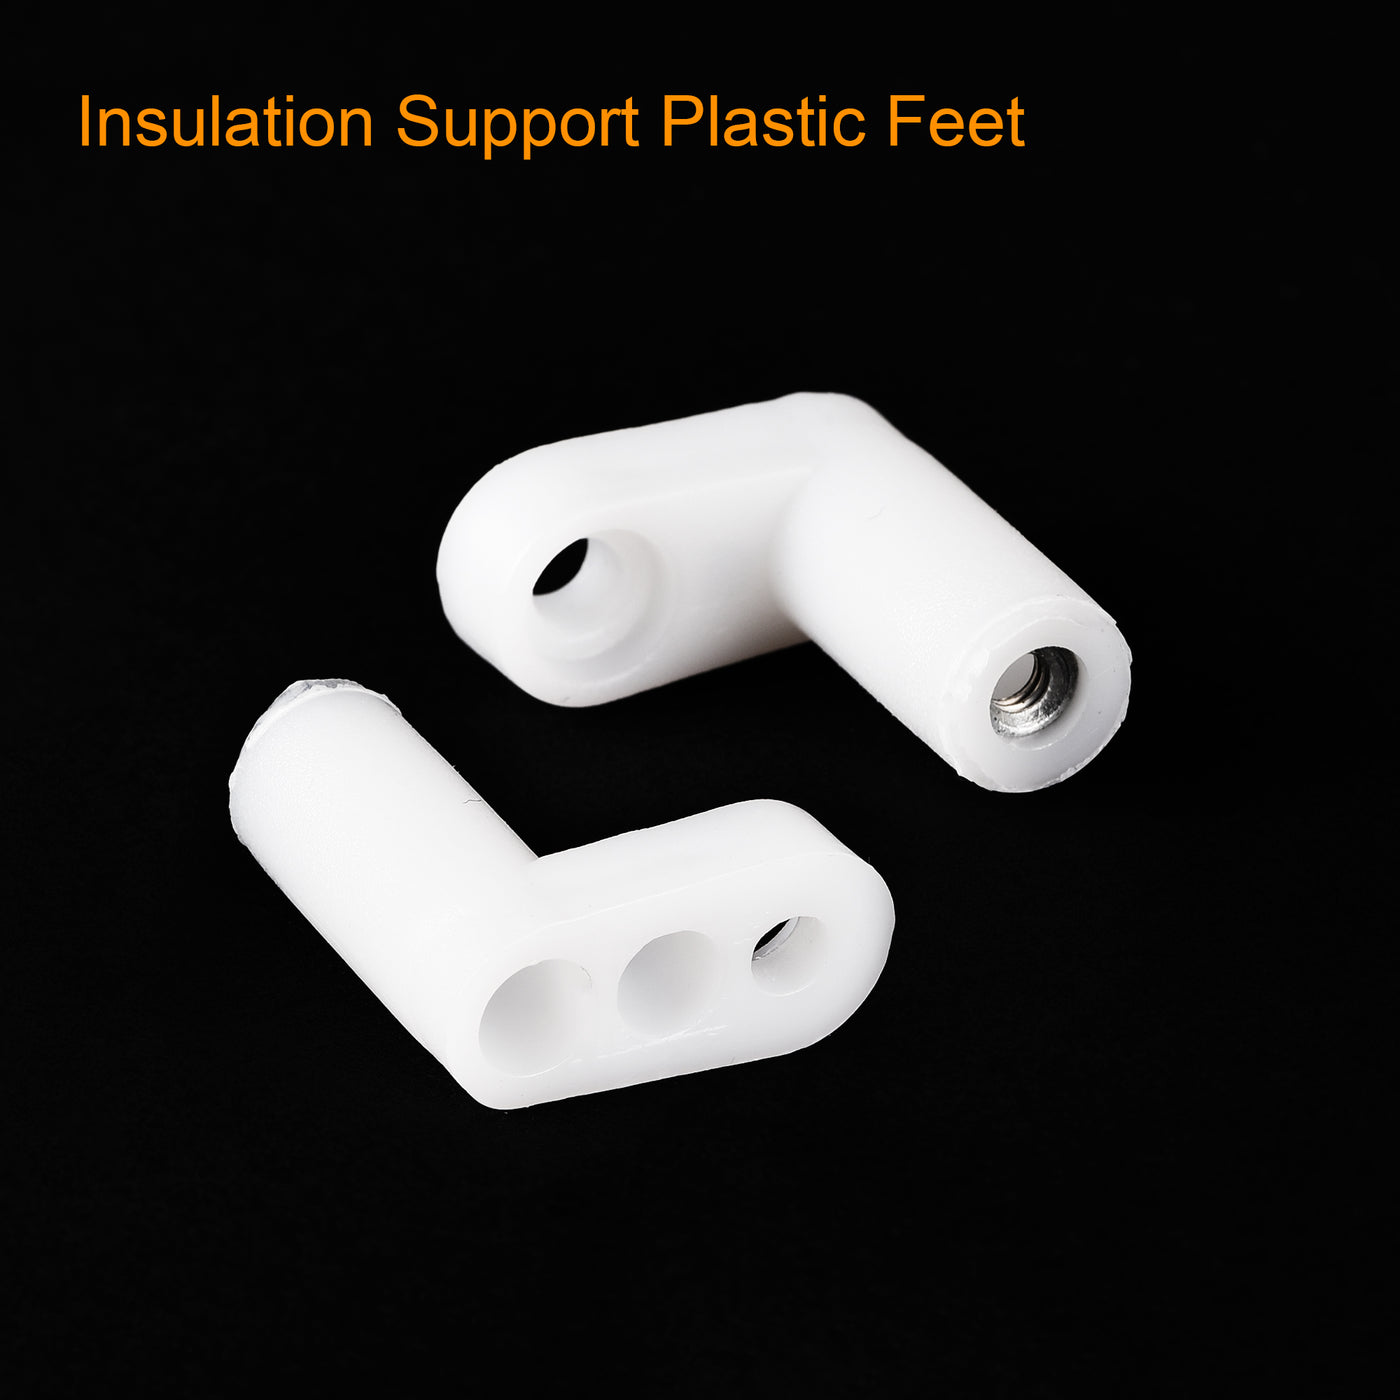 uxcell Uxcell 50Pcs Circuit Board PCB Spacers L Shape Insulated Plastic Fixed Mounting Feet White 0.8'' Supporting Height with M3 Screw